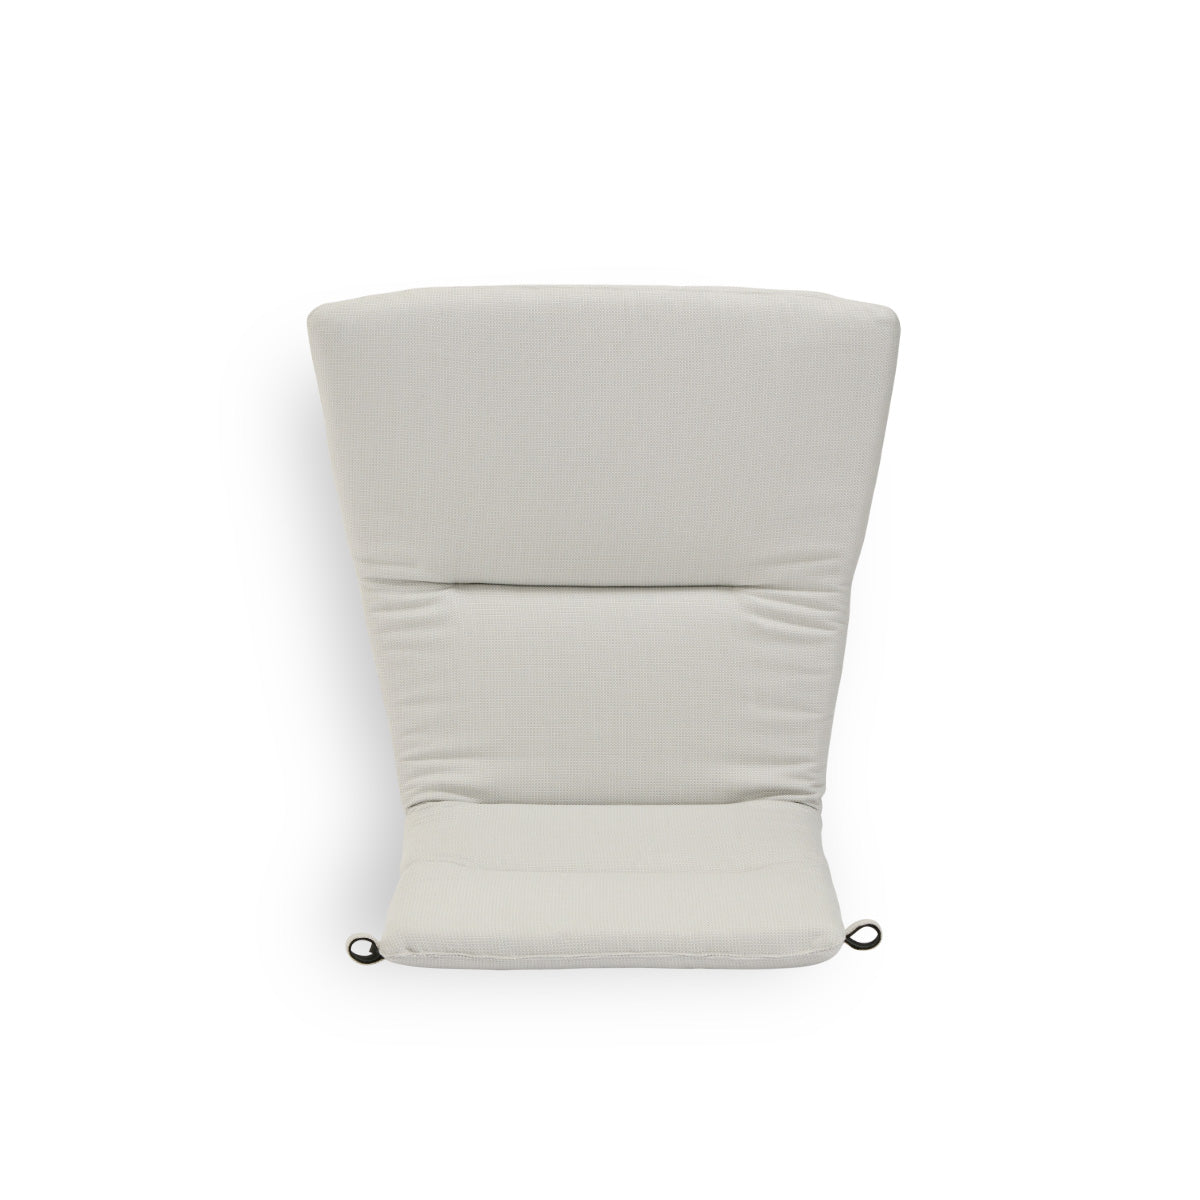 Seat & back cushion | Teddy Exterior Lounge Chair